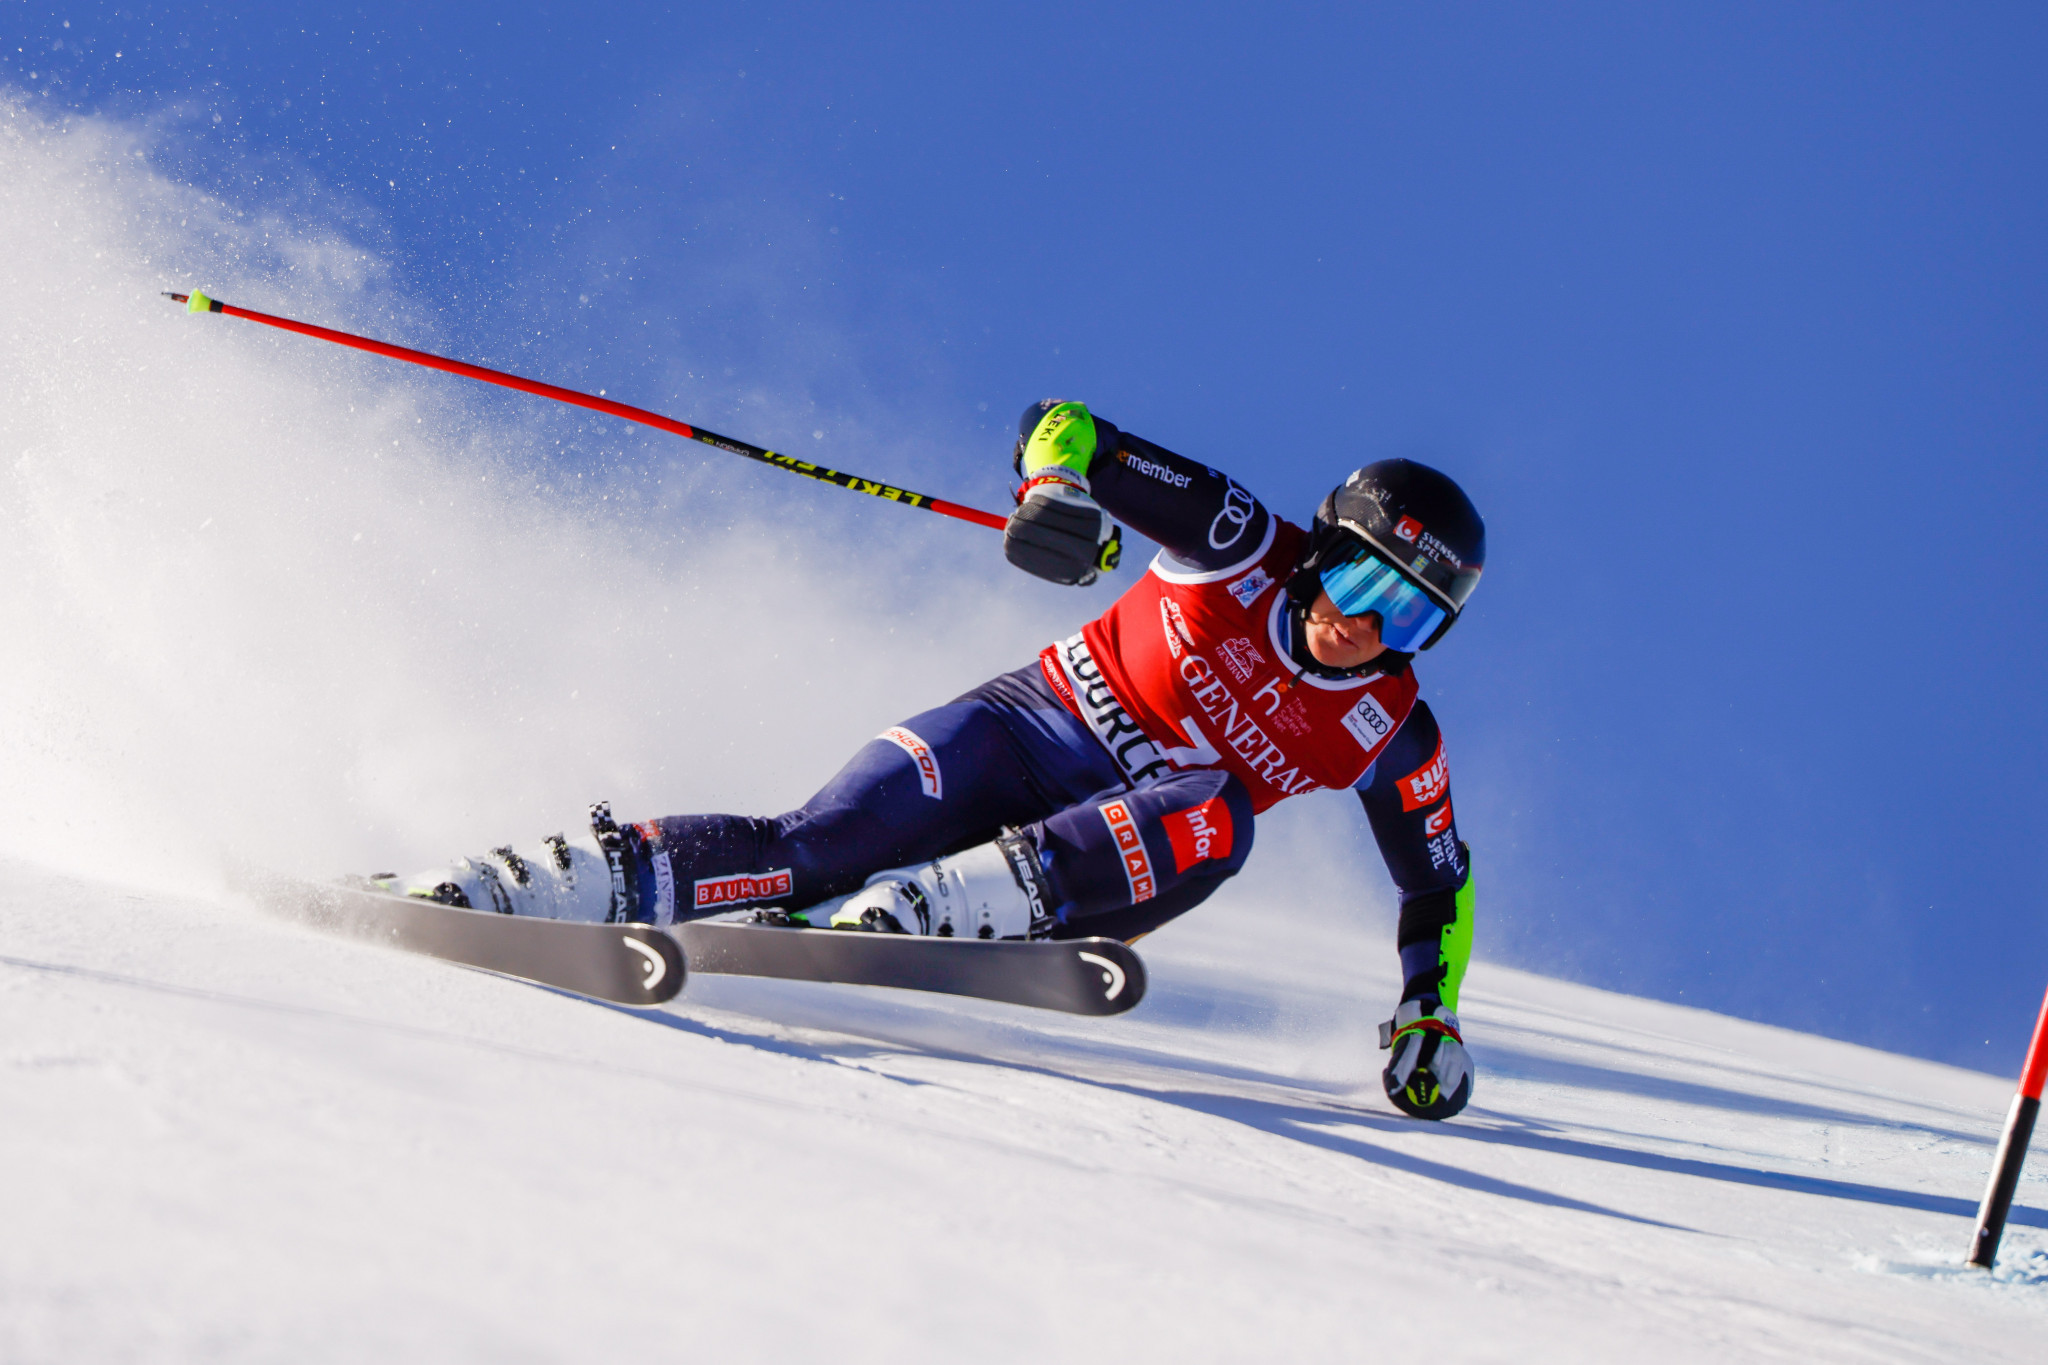 Sweden's Sara Hector leads the FIS Alpine Ski World Cup giant slalom standings by 46 points to America's Mikaela Shiffrin heading into the latest leg in Kronplatz tomorrow ©Getty Images